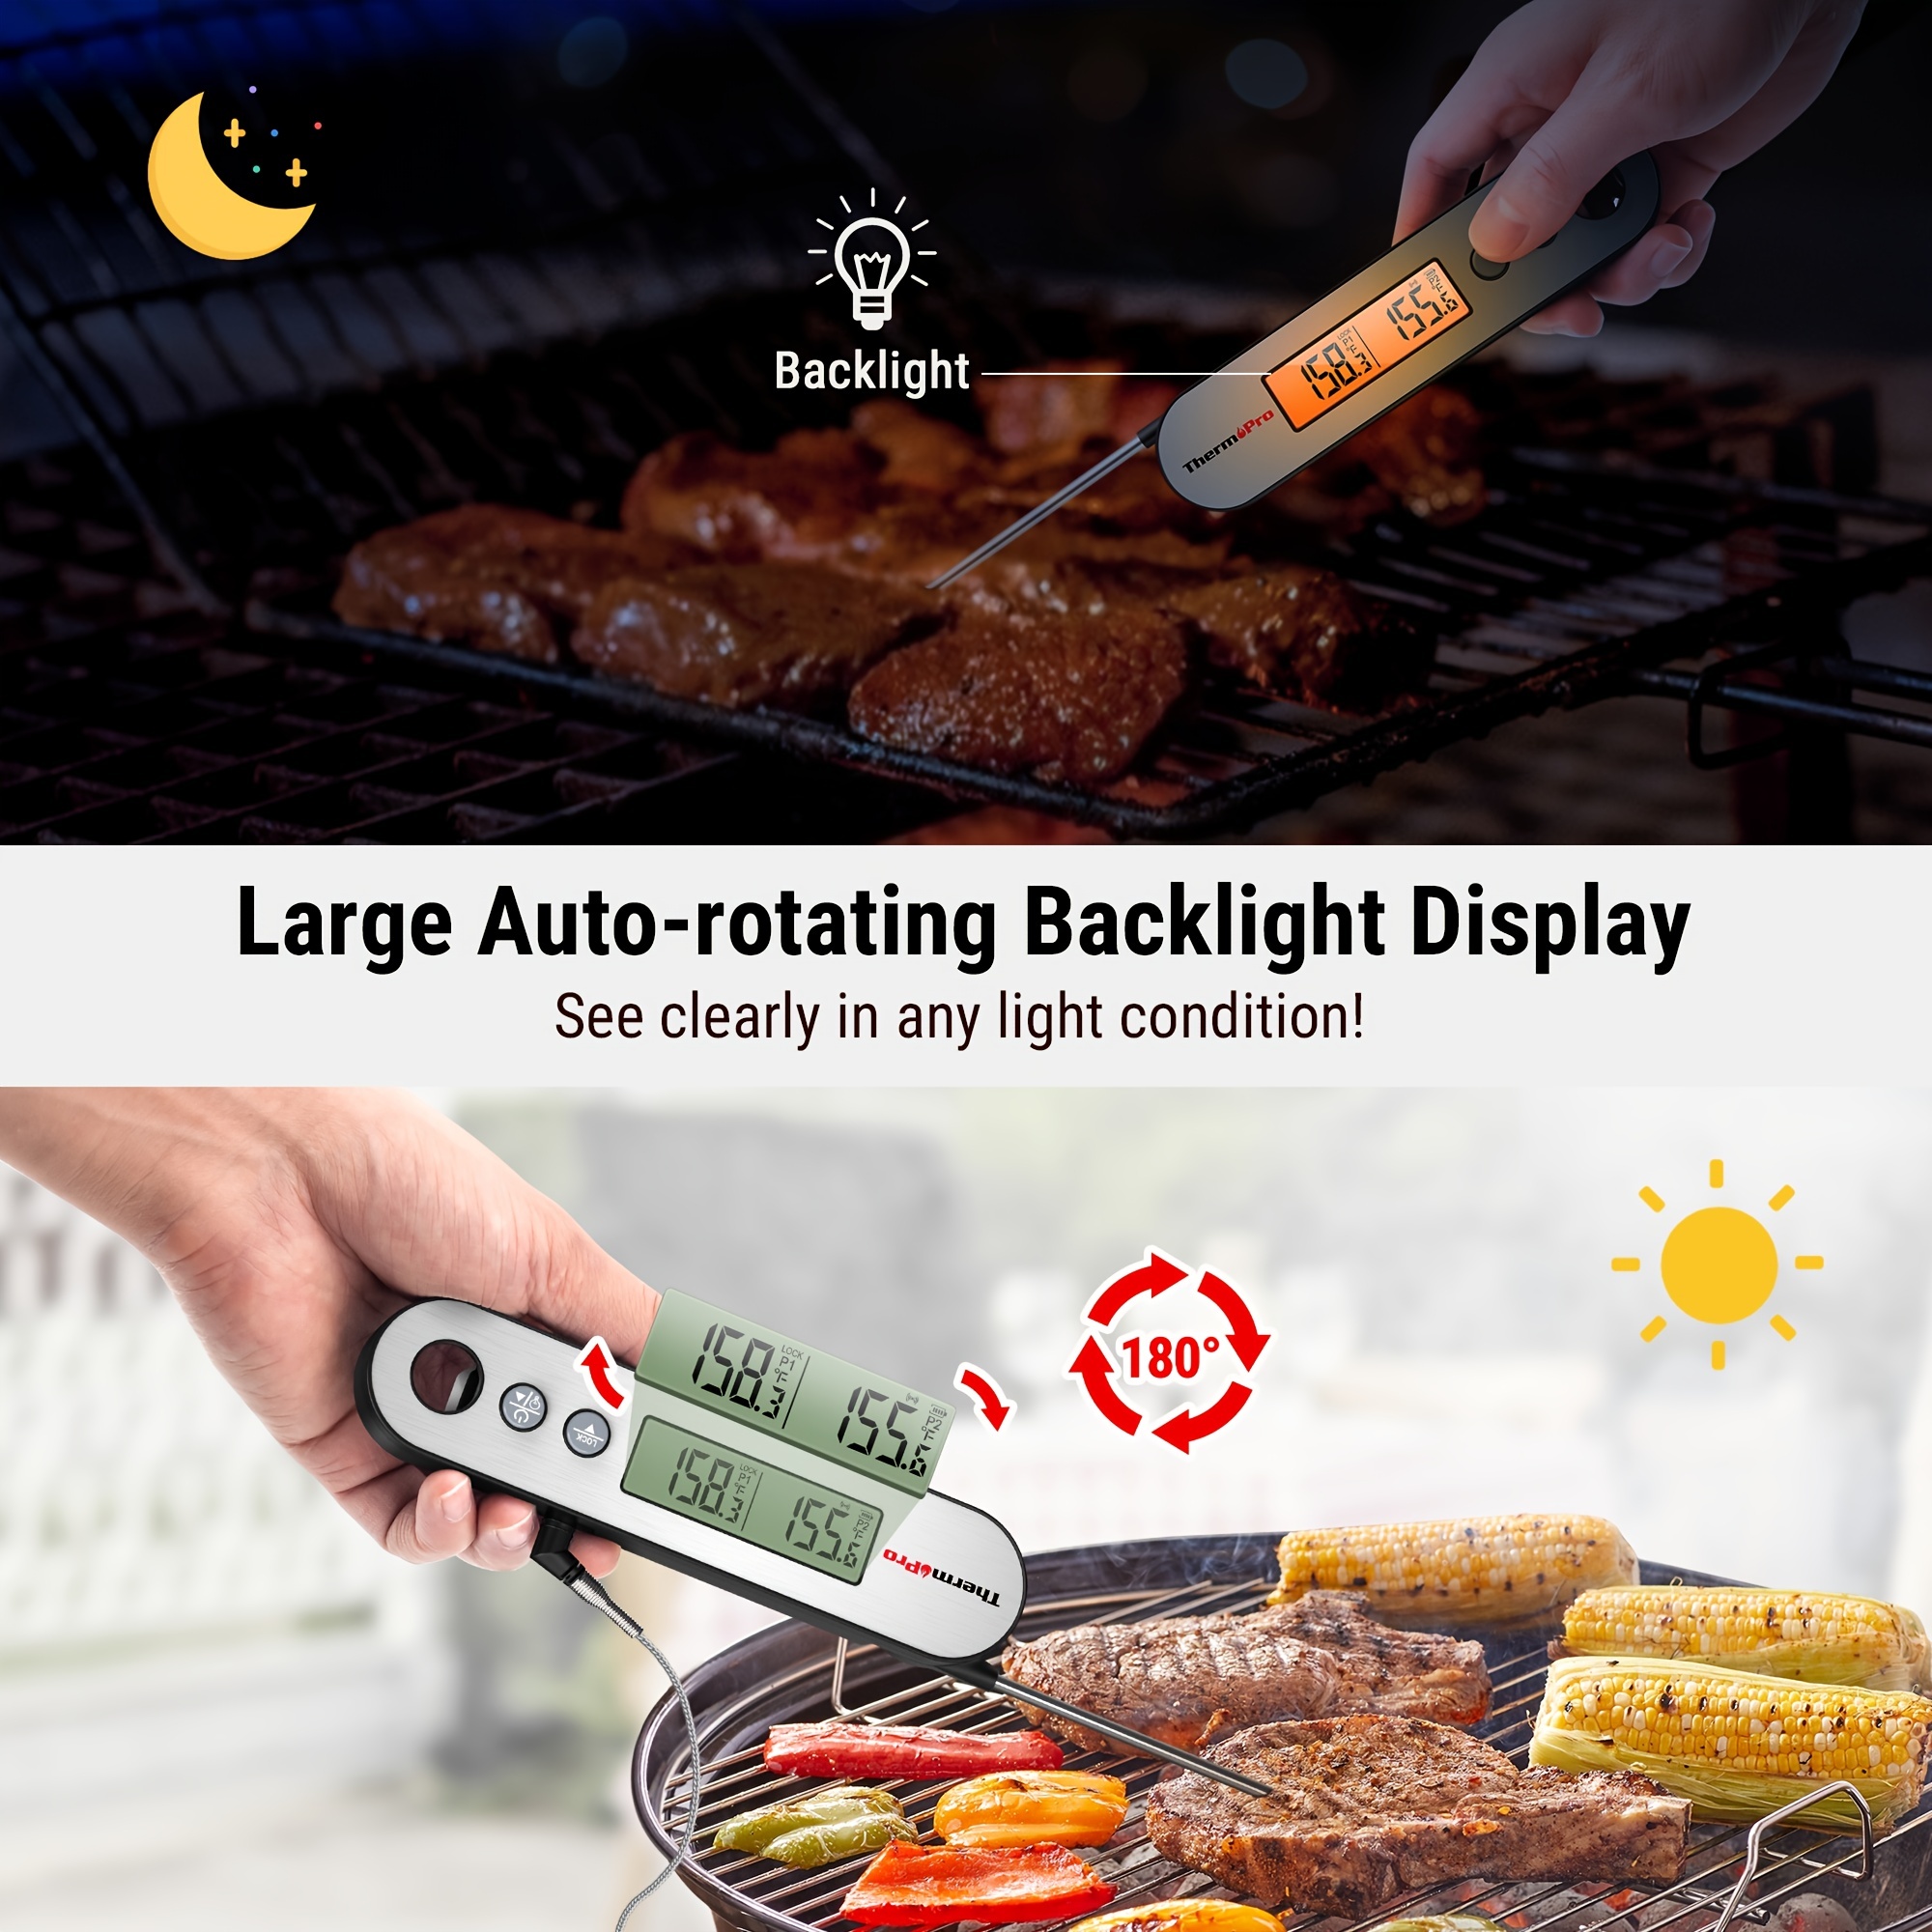 How to Use a BBQ Thermometer